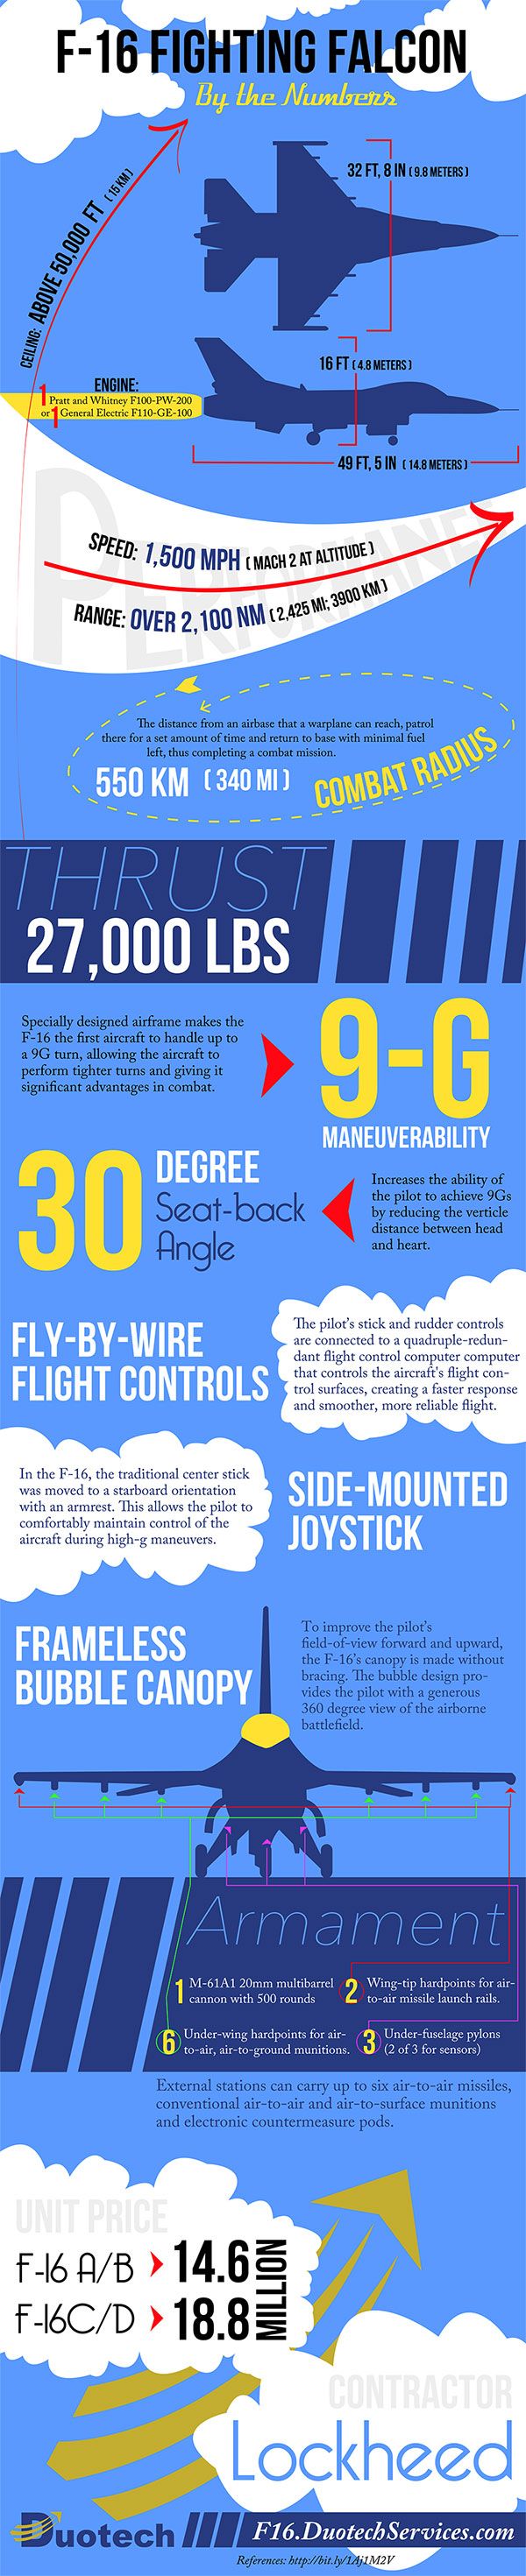 F-16 Fighting Falcon Facts Infographic